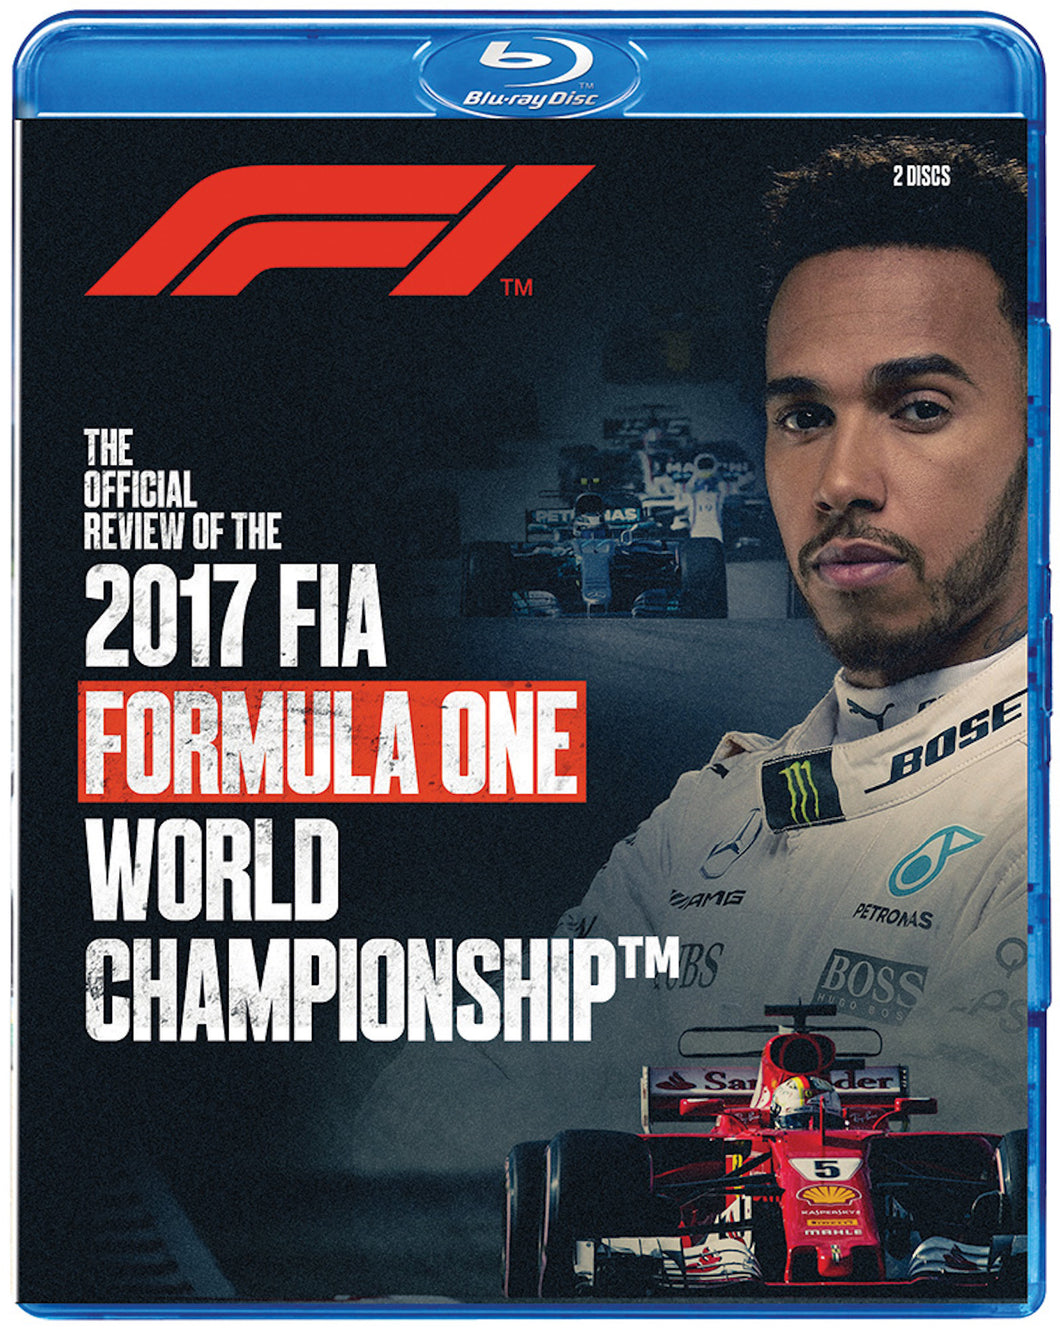 F1 2017 Official Review Blu-ray (Blu-ray)